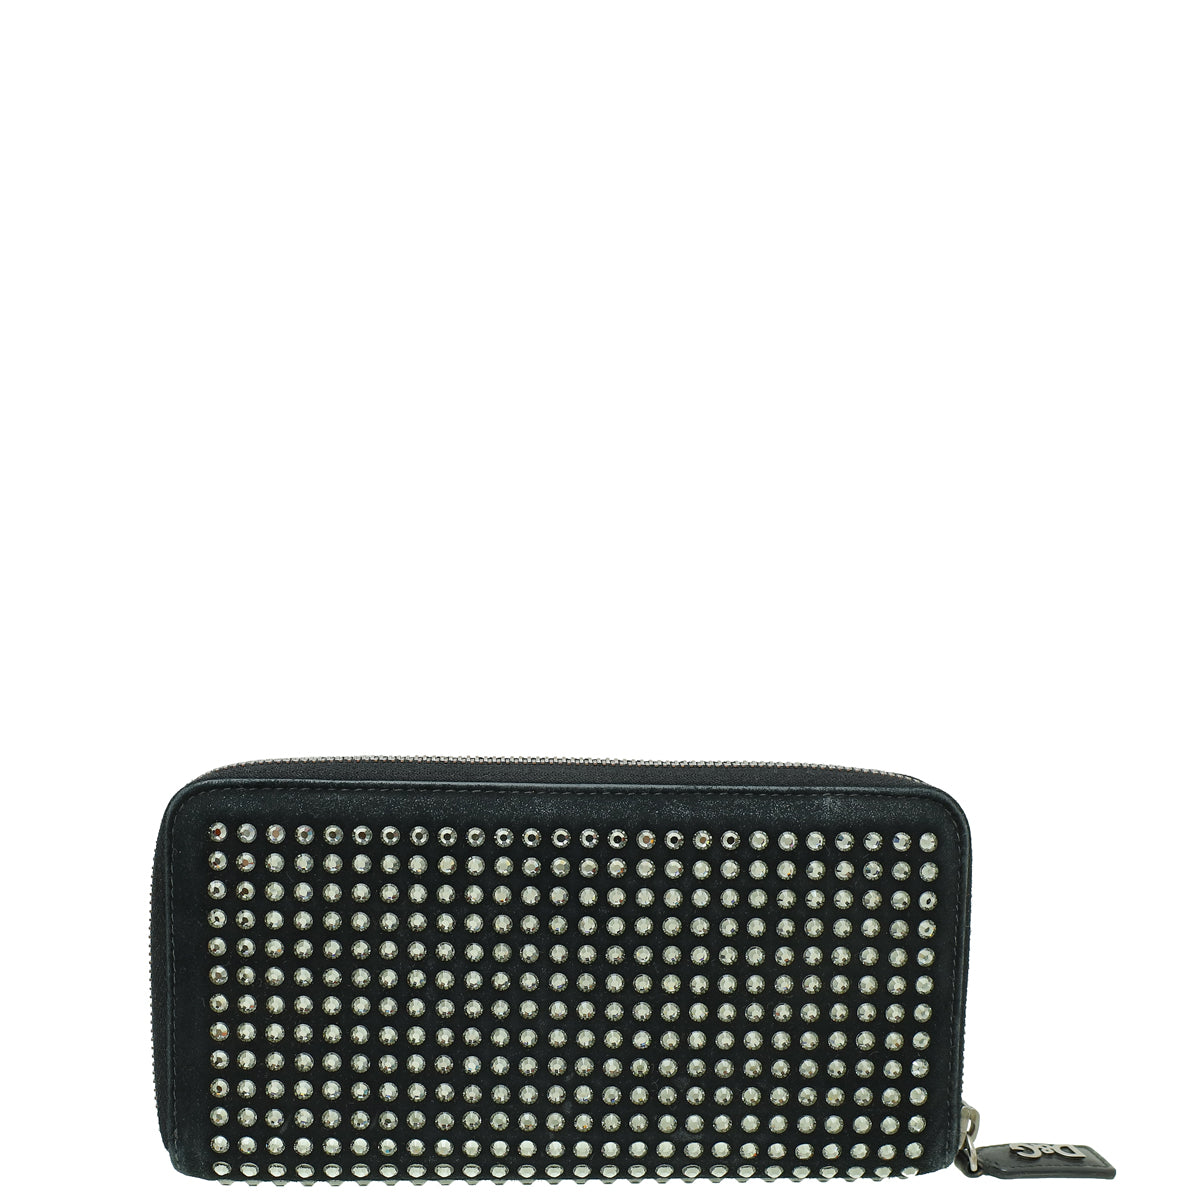 Dolce & Gabbana Black Suede Crystal Studded Zipped Around Long Wallet